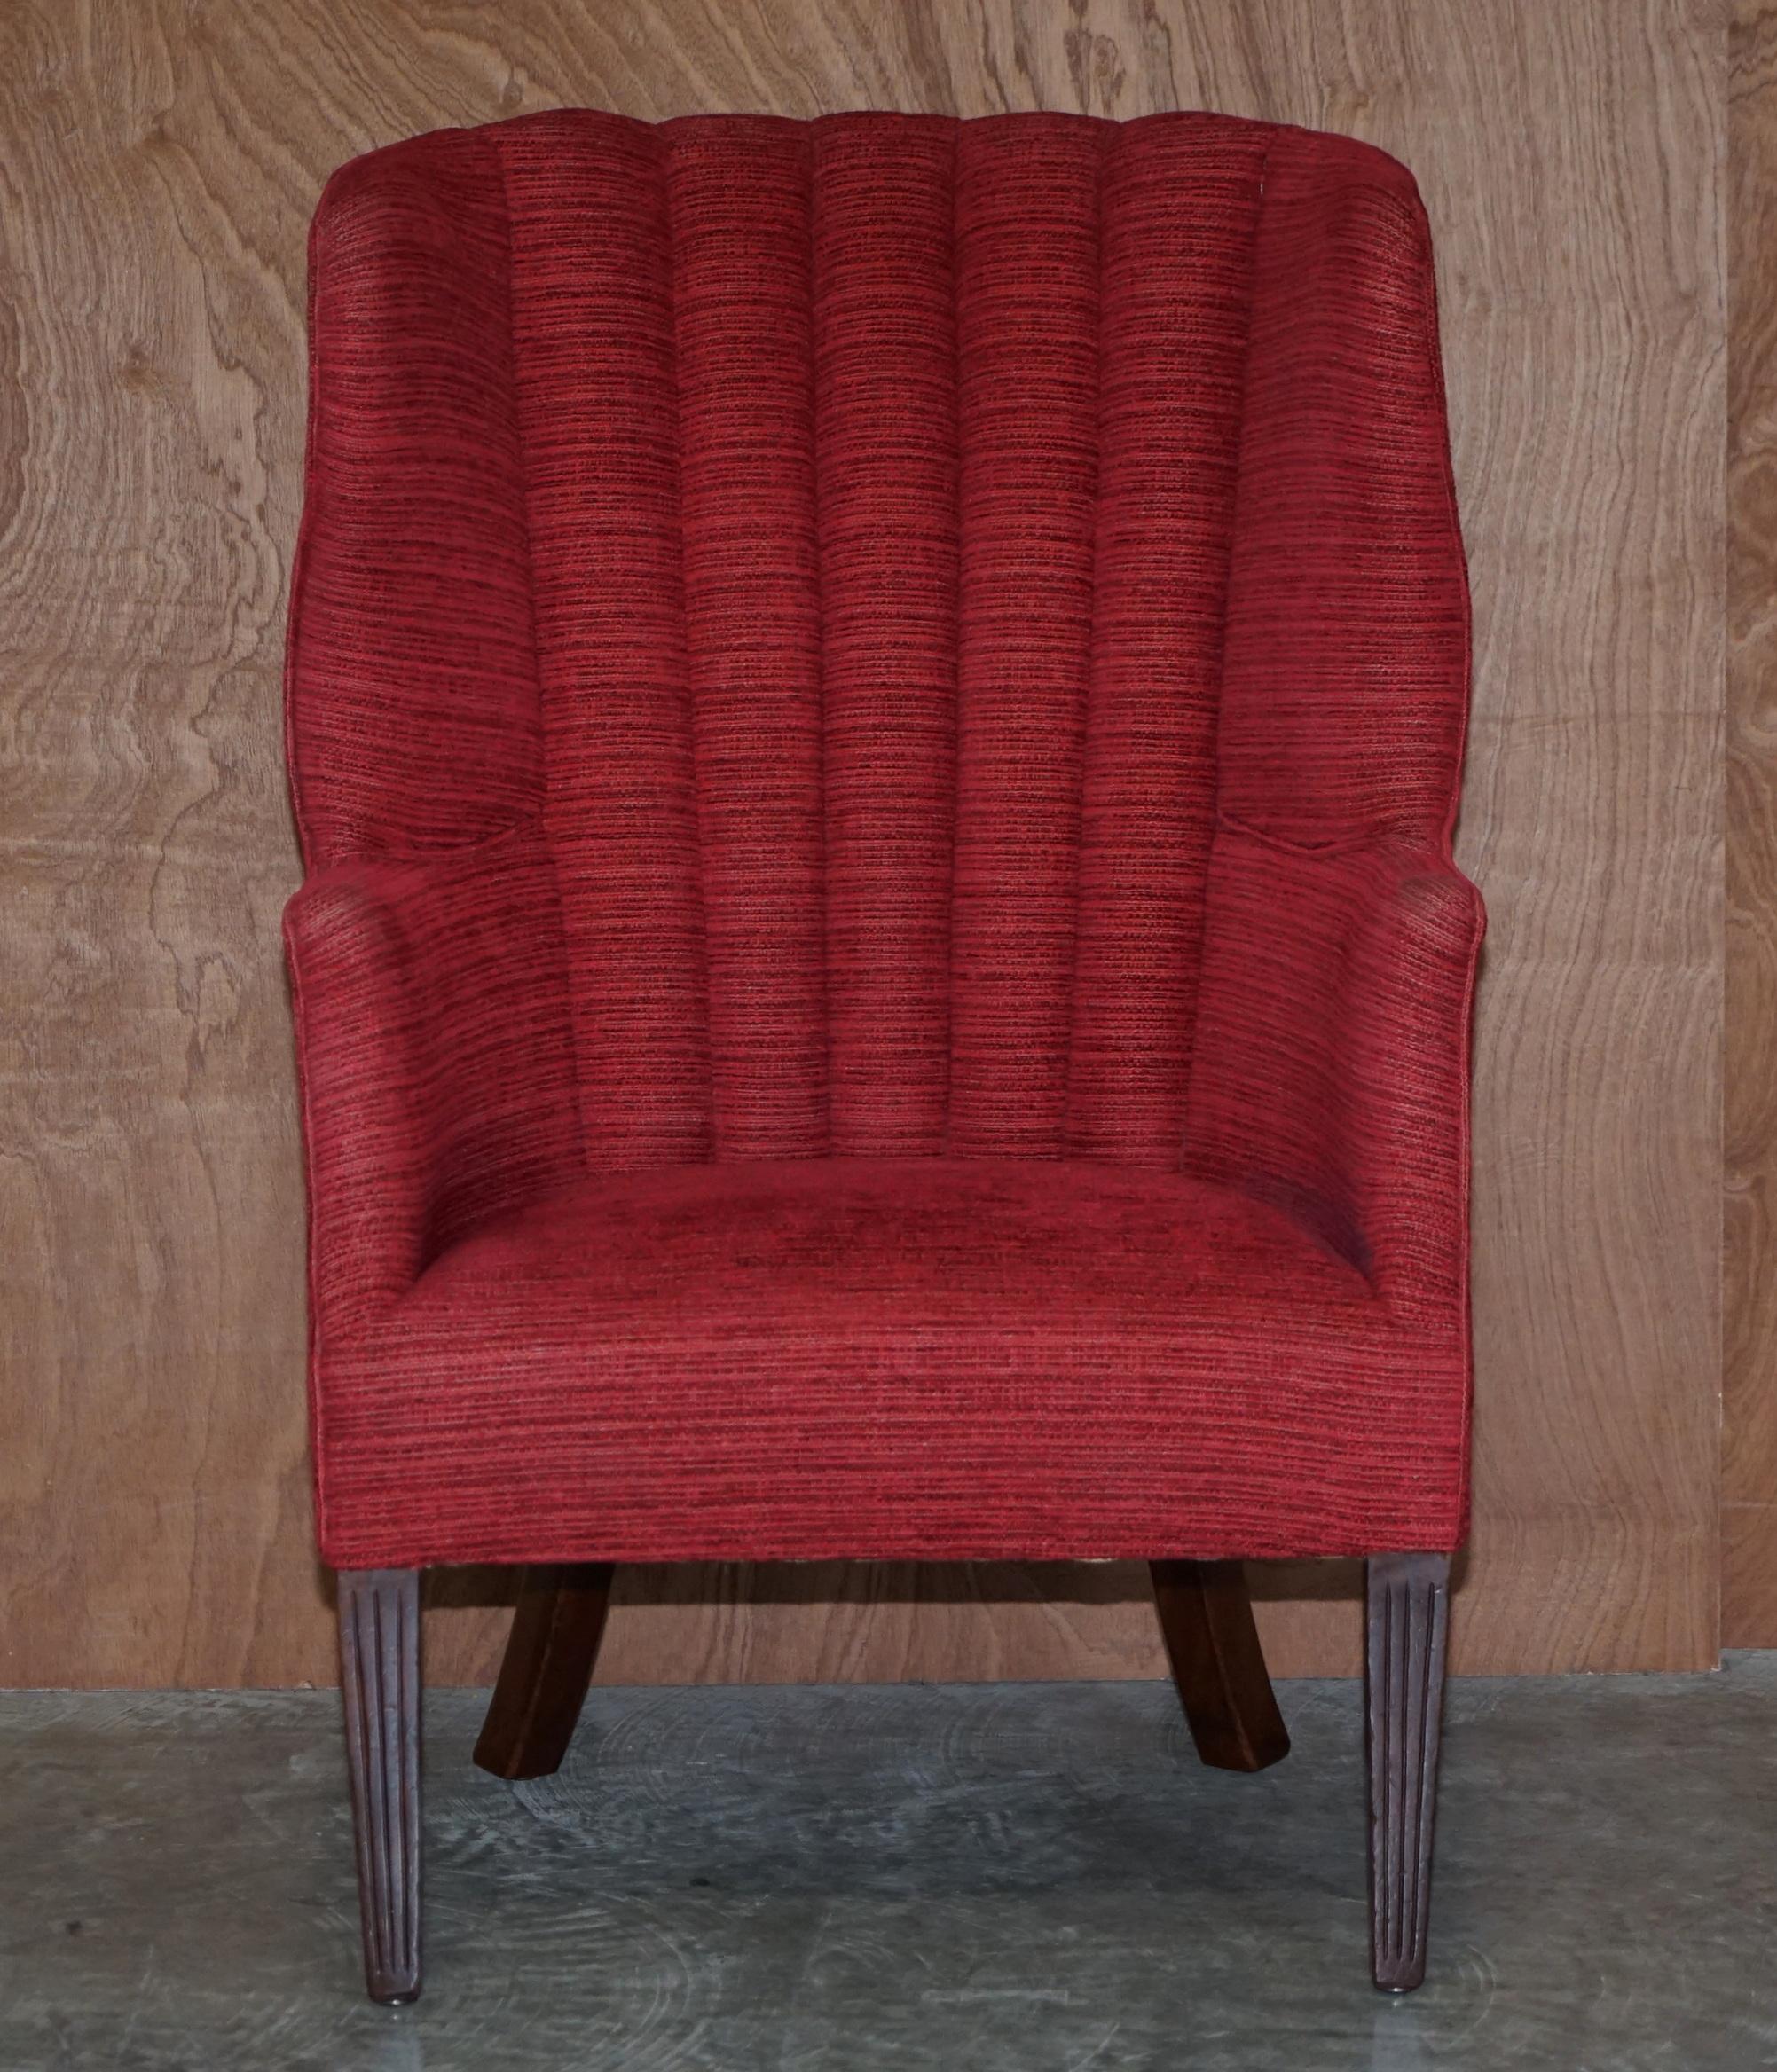 We are delighted to offer for sale this stunning early Victorian Porters barrel back armchair with fluted back 

This chair a real tour de force, is has absolutely everything going for it, it has the original fluted back which is more comfortable